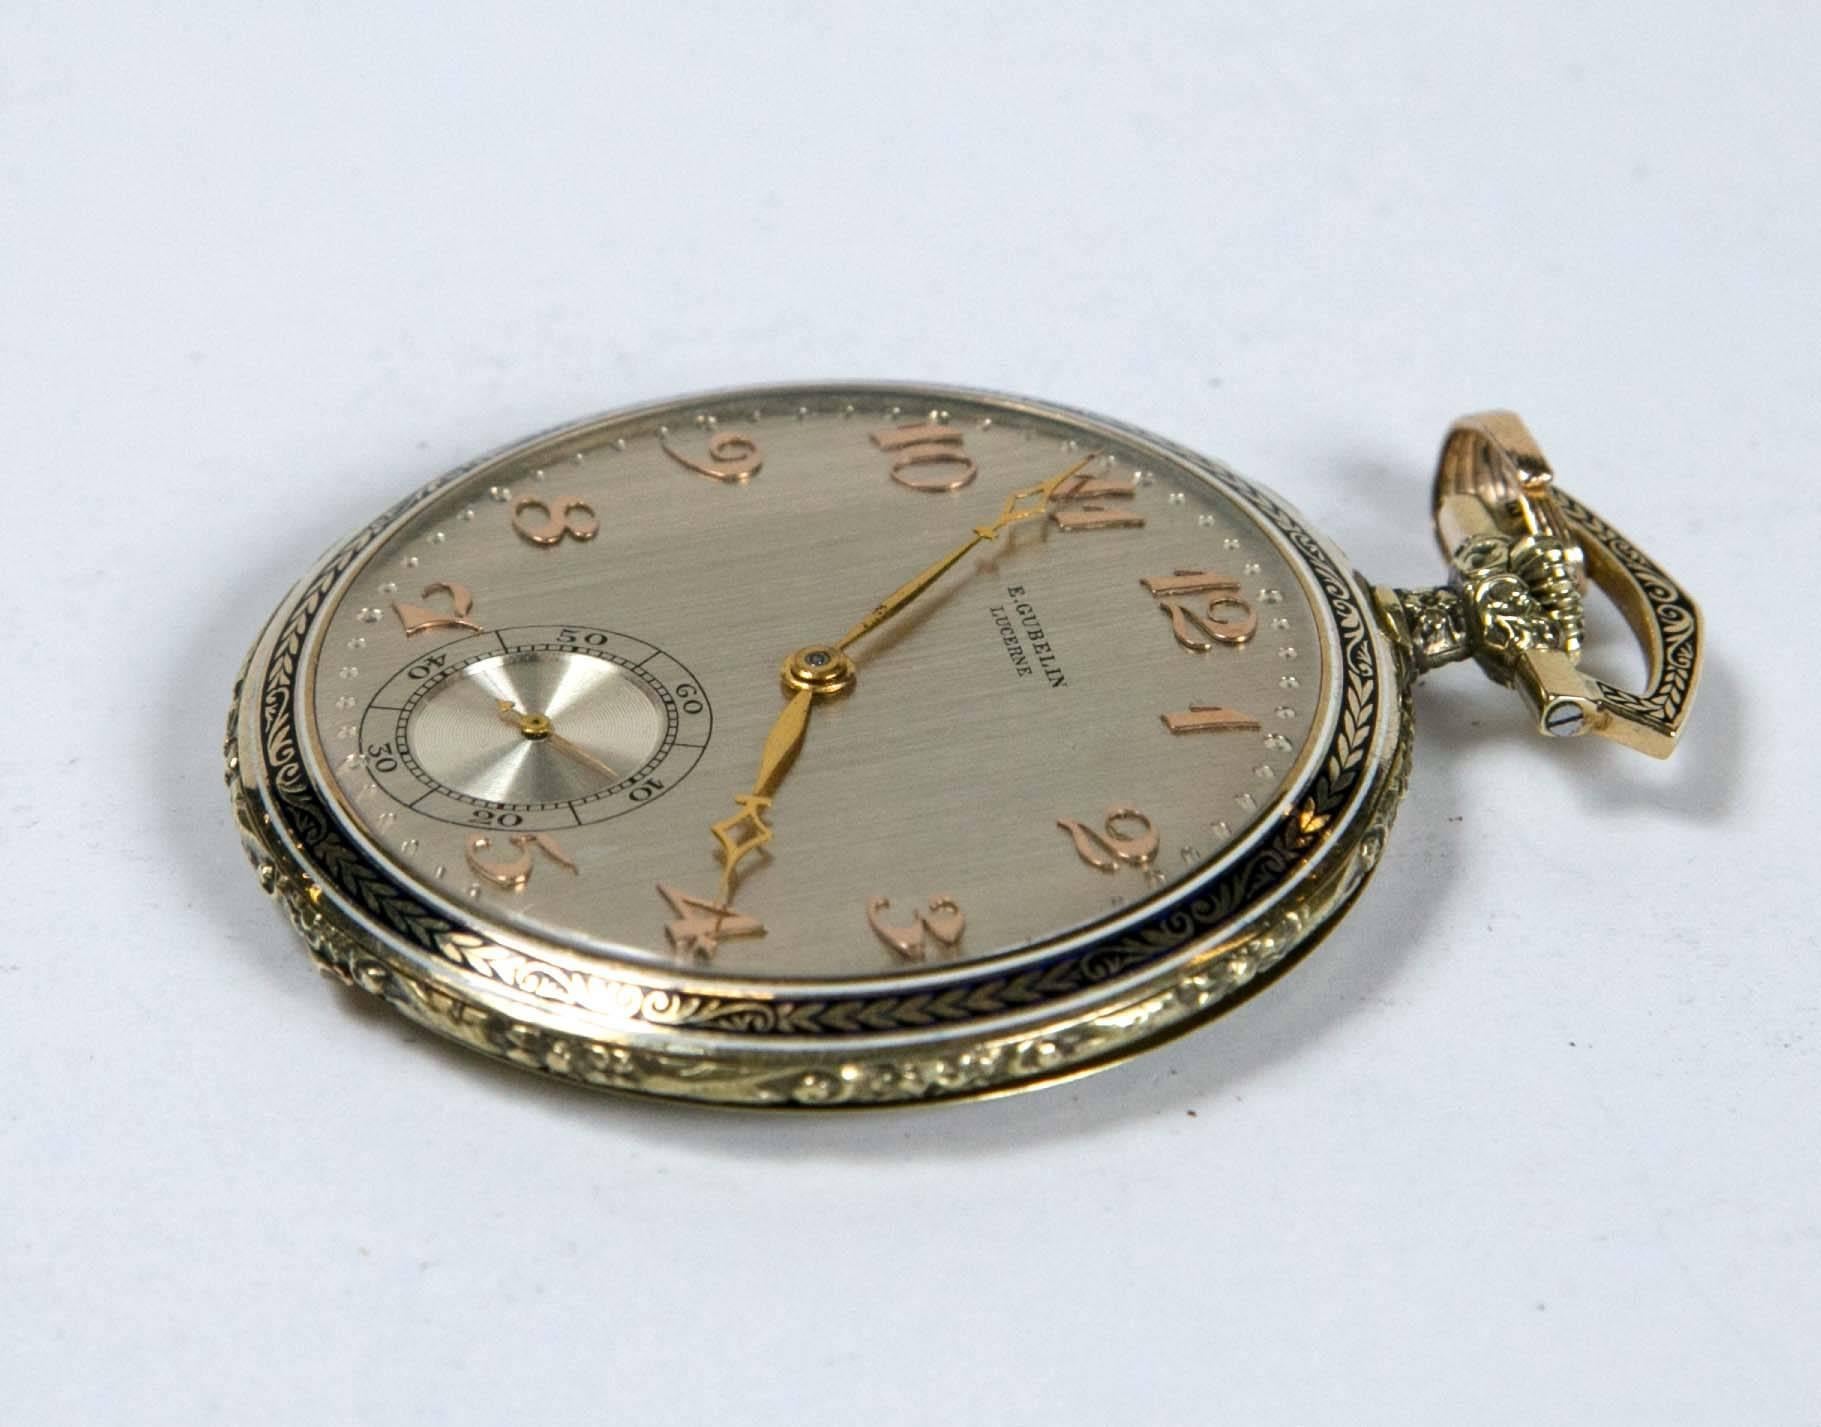 Antique Swiss pocket watch, E Gubelin pocket watch. 16 Jewel and monogrammed as shown. In working condition. A jeweler can remove the monogram. The bale is also 14-karat yellow gold. It is 1.75